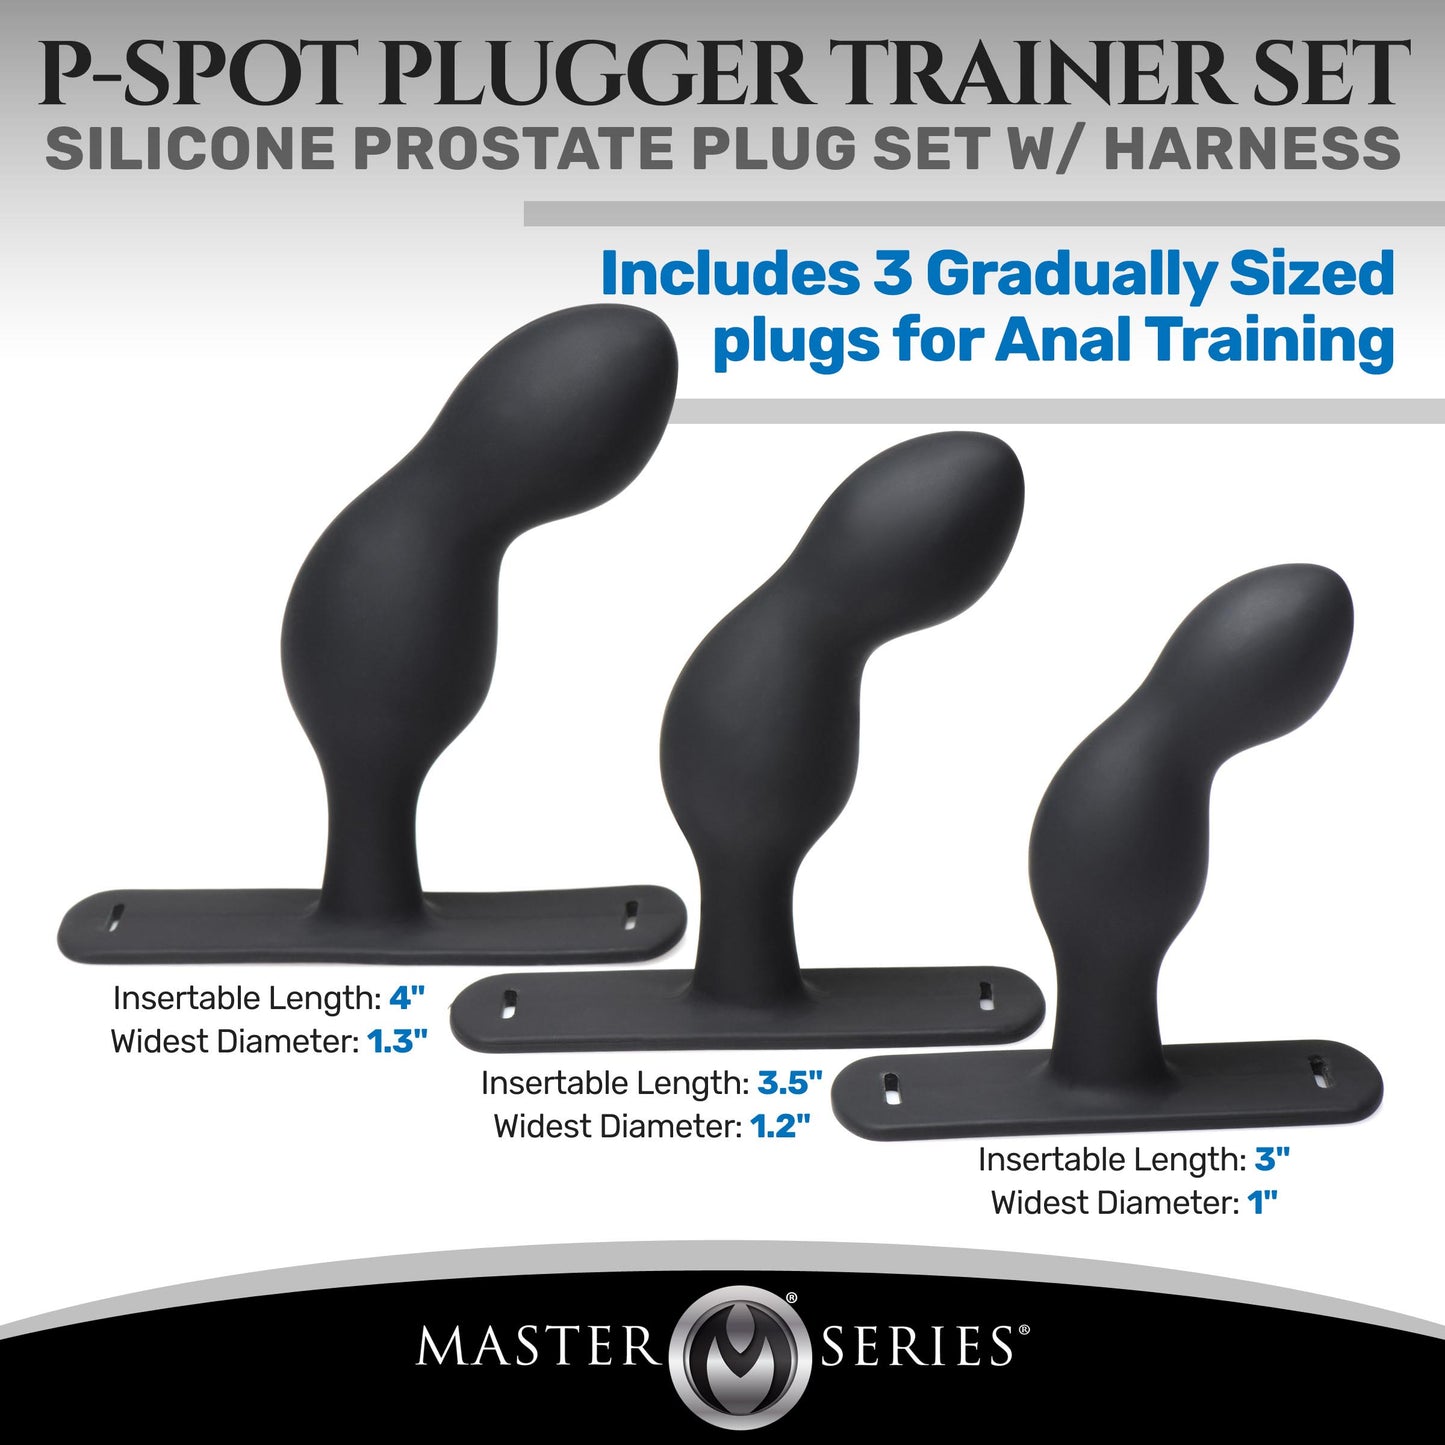 P-Spot Plugger Trainer Comfort Harness with Plugs